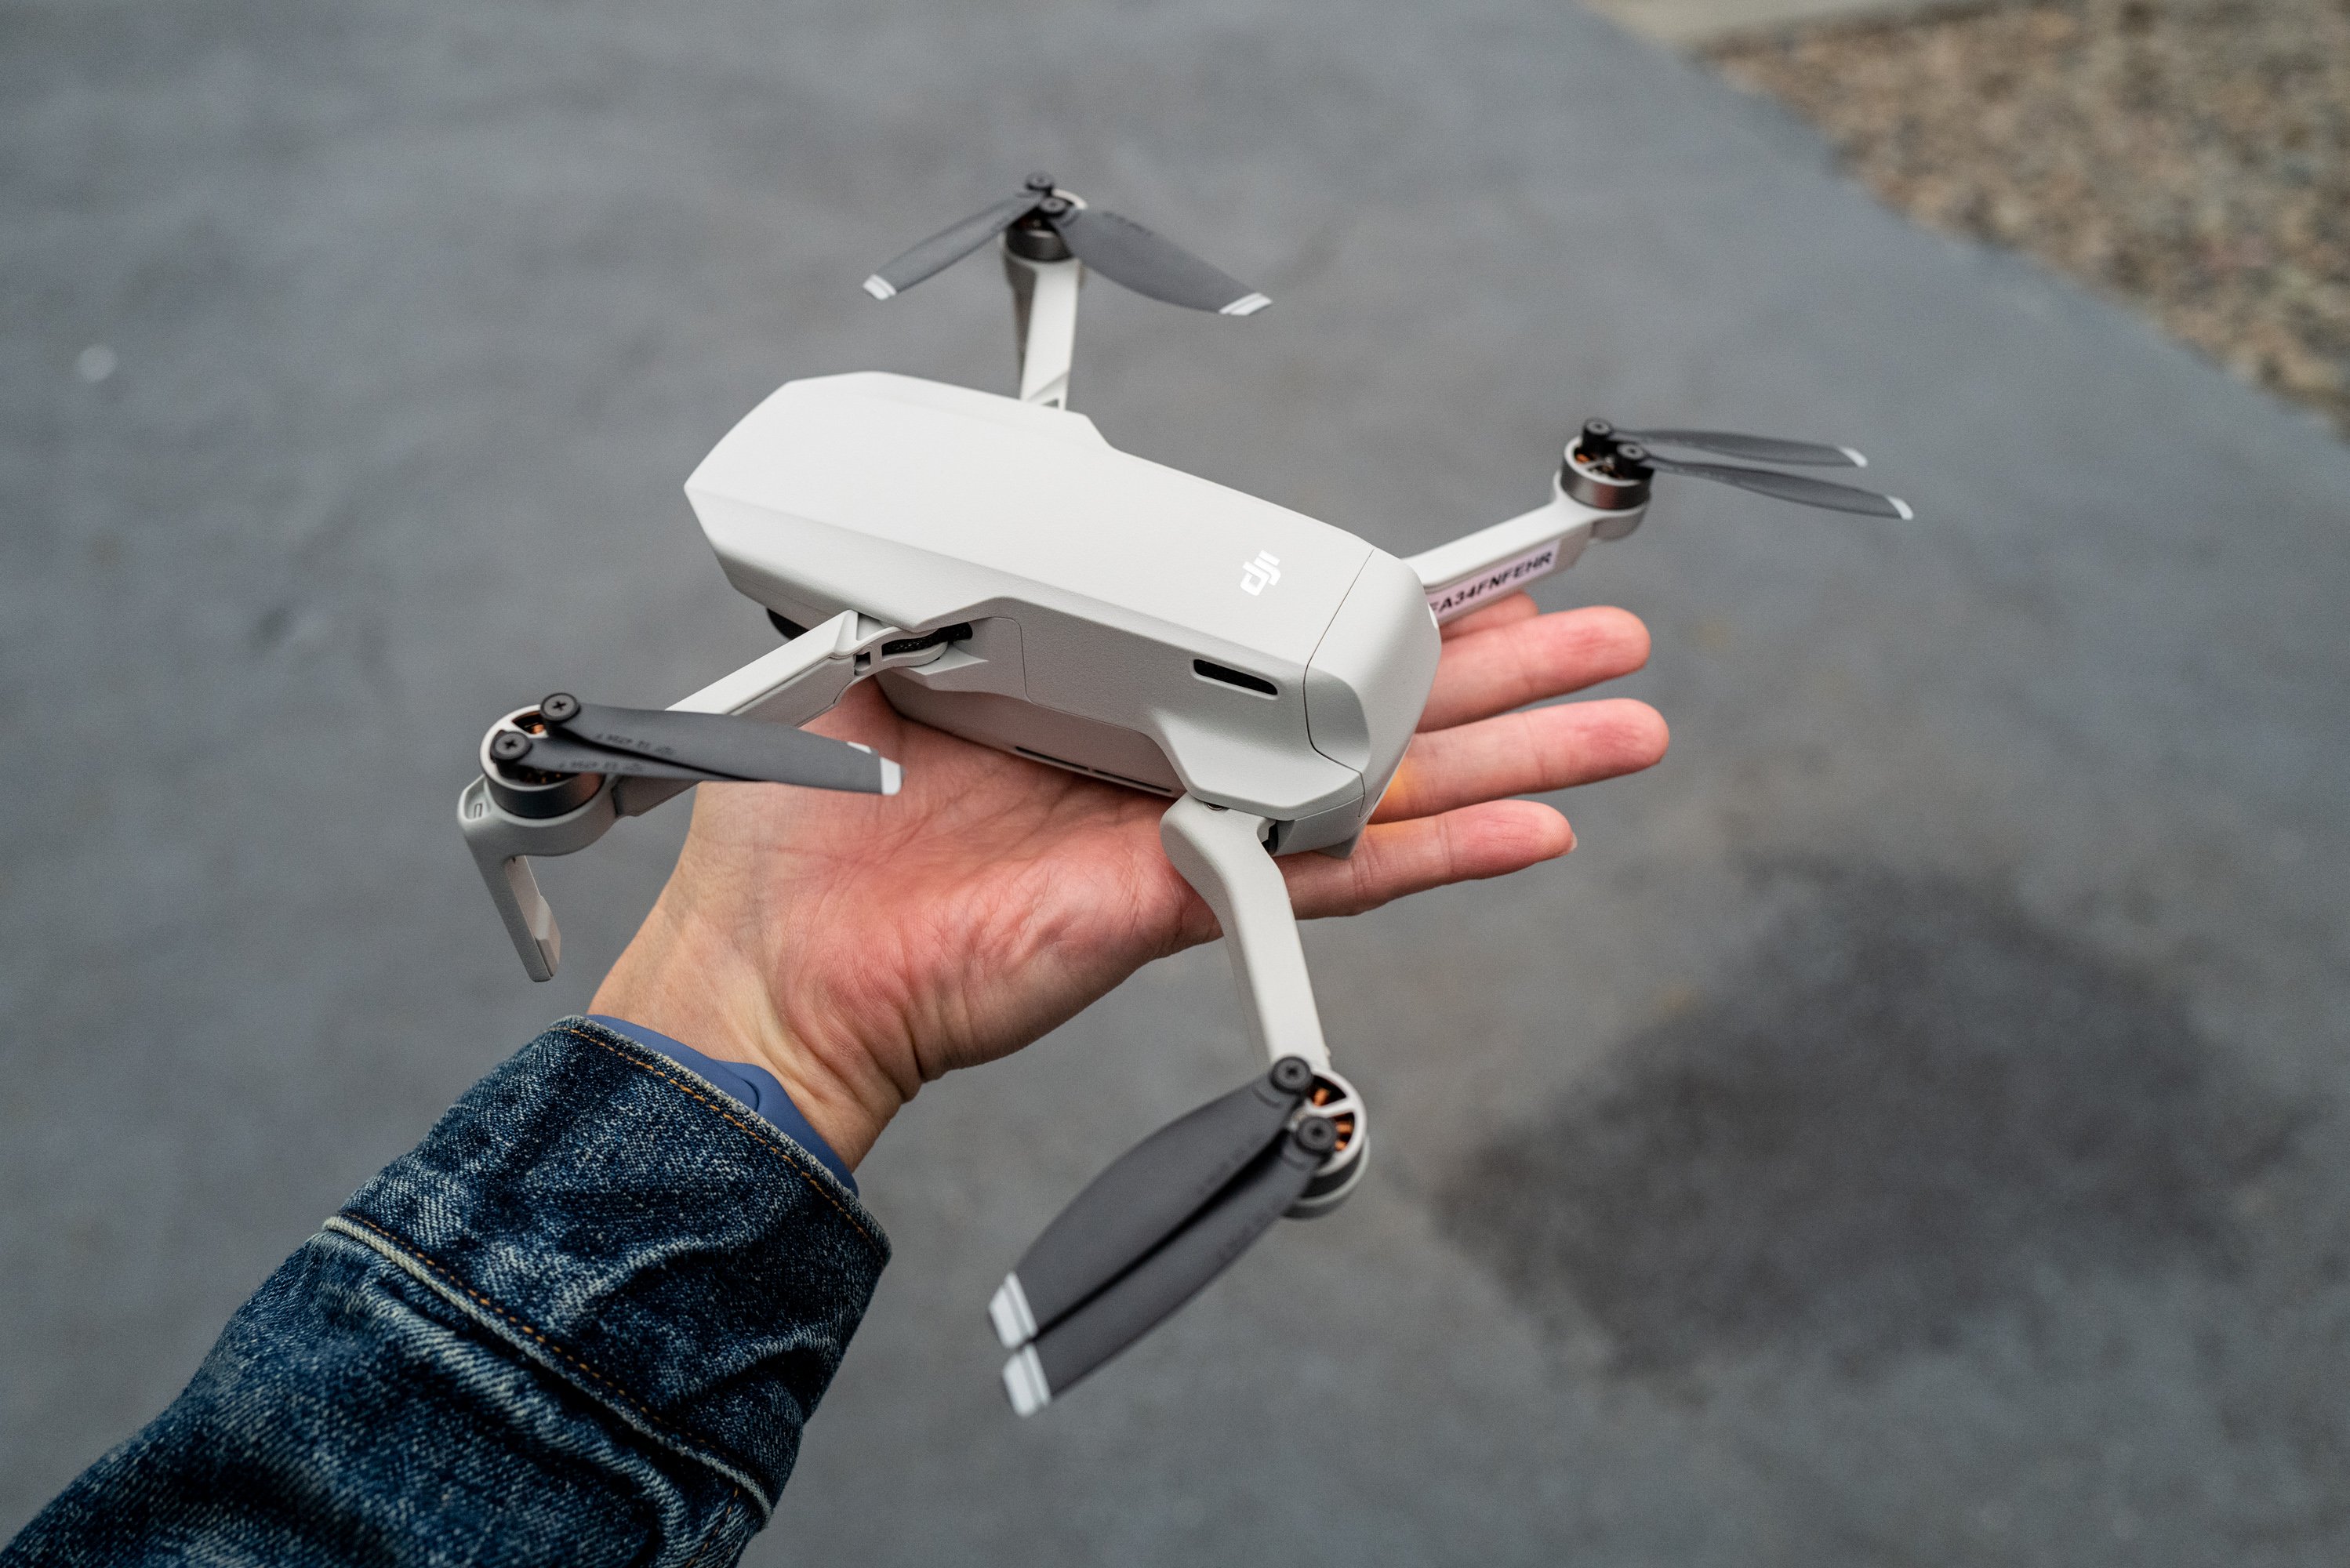 Mavic Mini Drone from @DJI Packs a Punch at Under 250g – YourTechReport